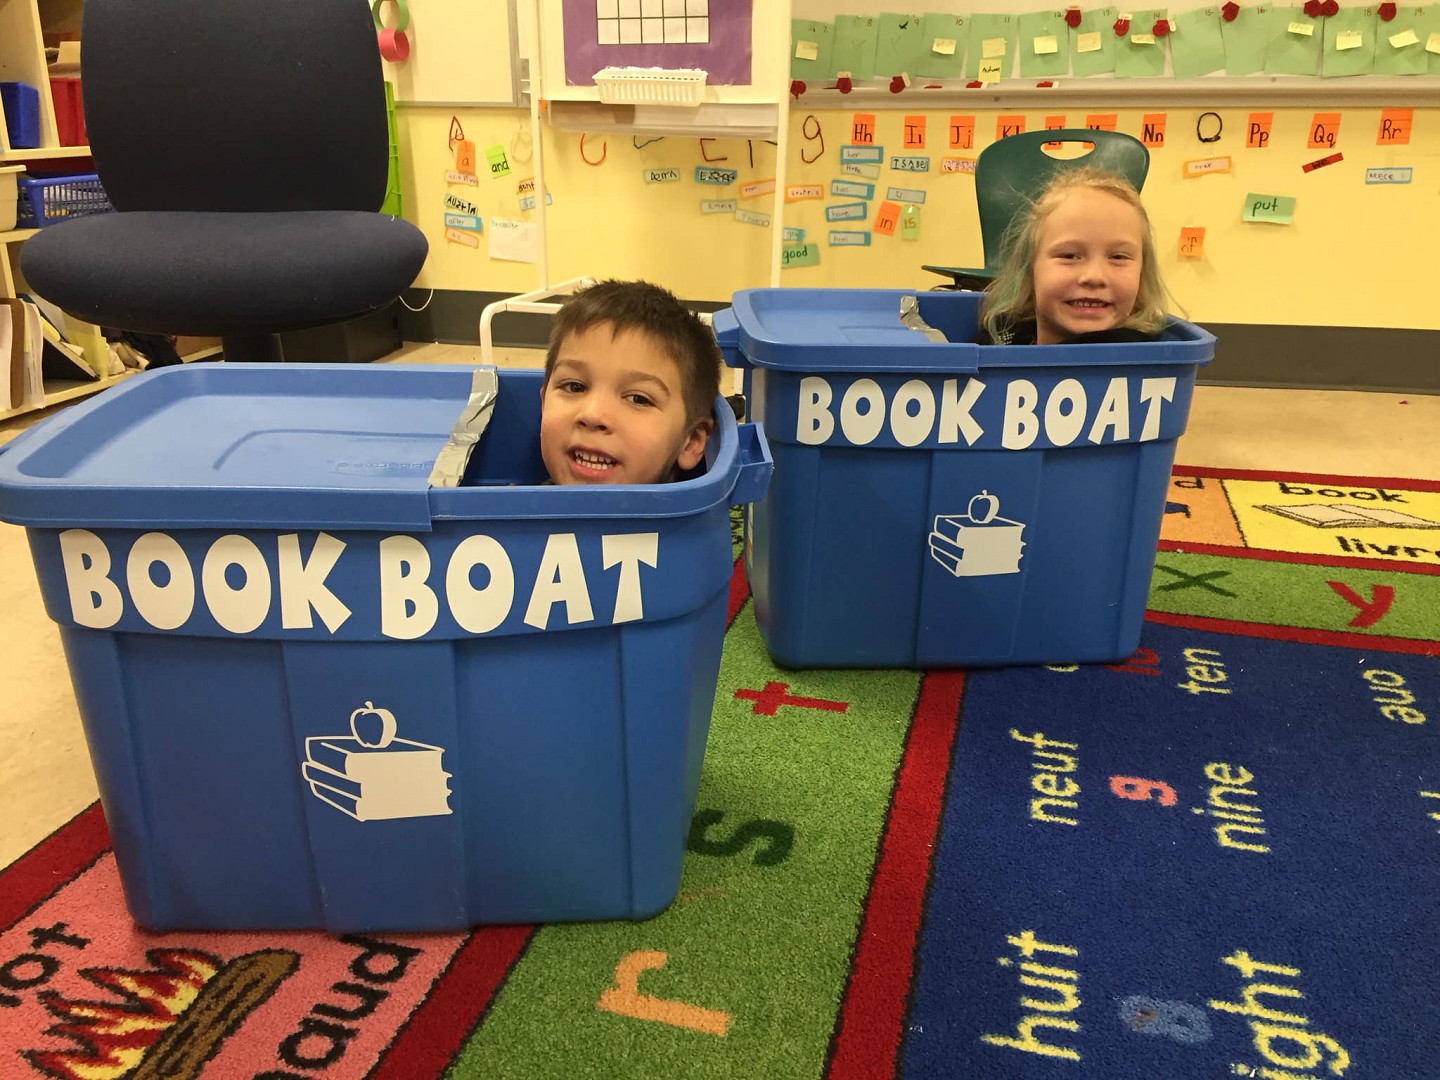 Children Playing in the book boat